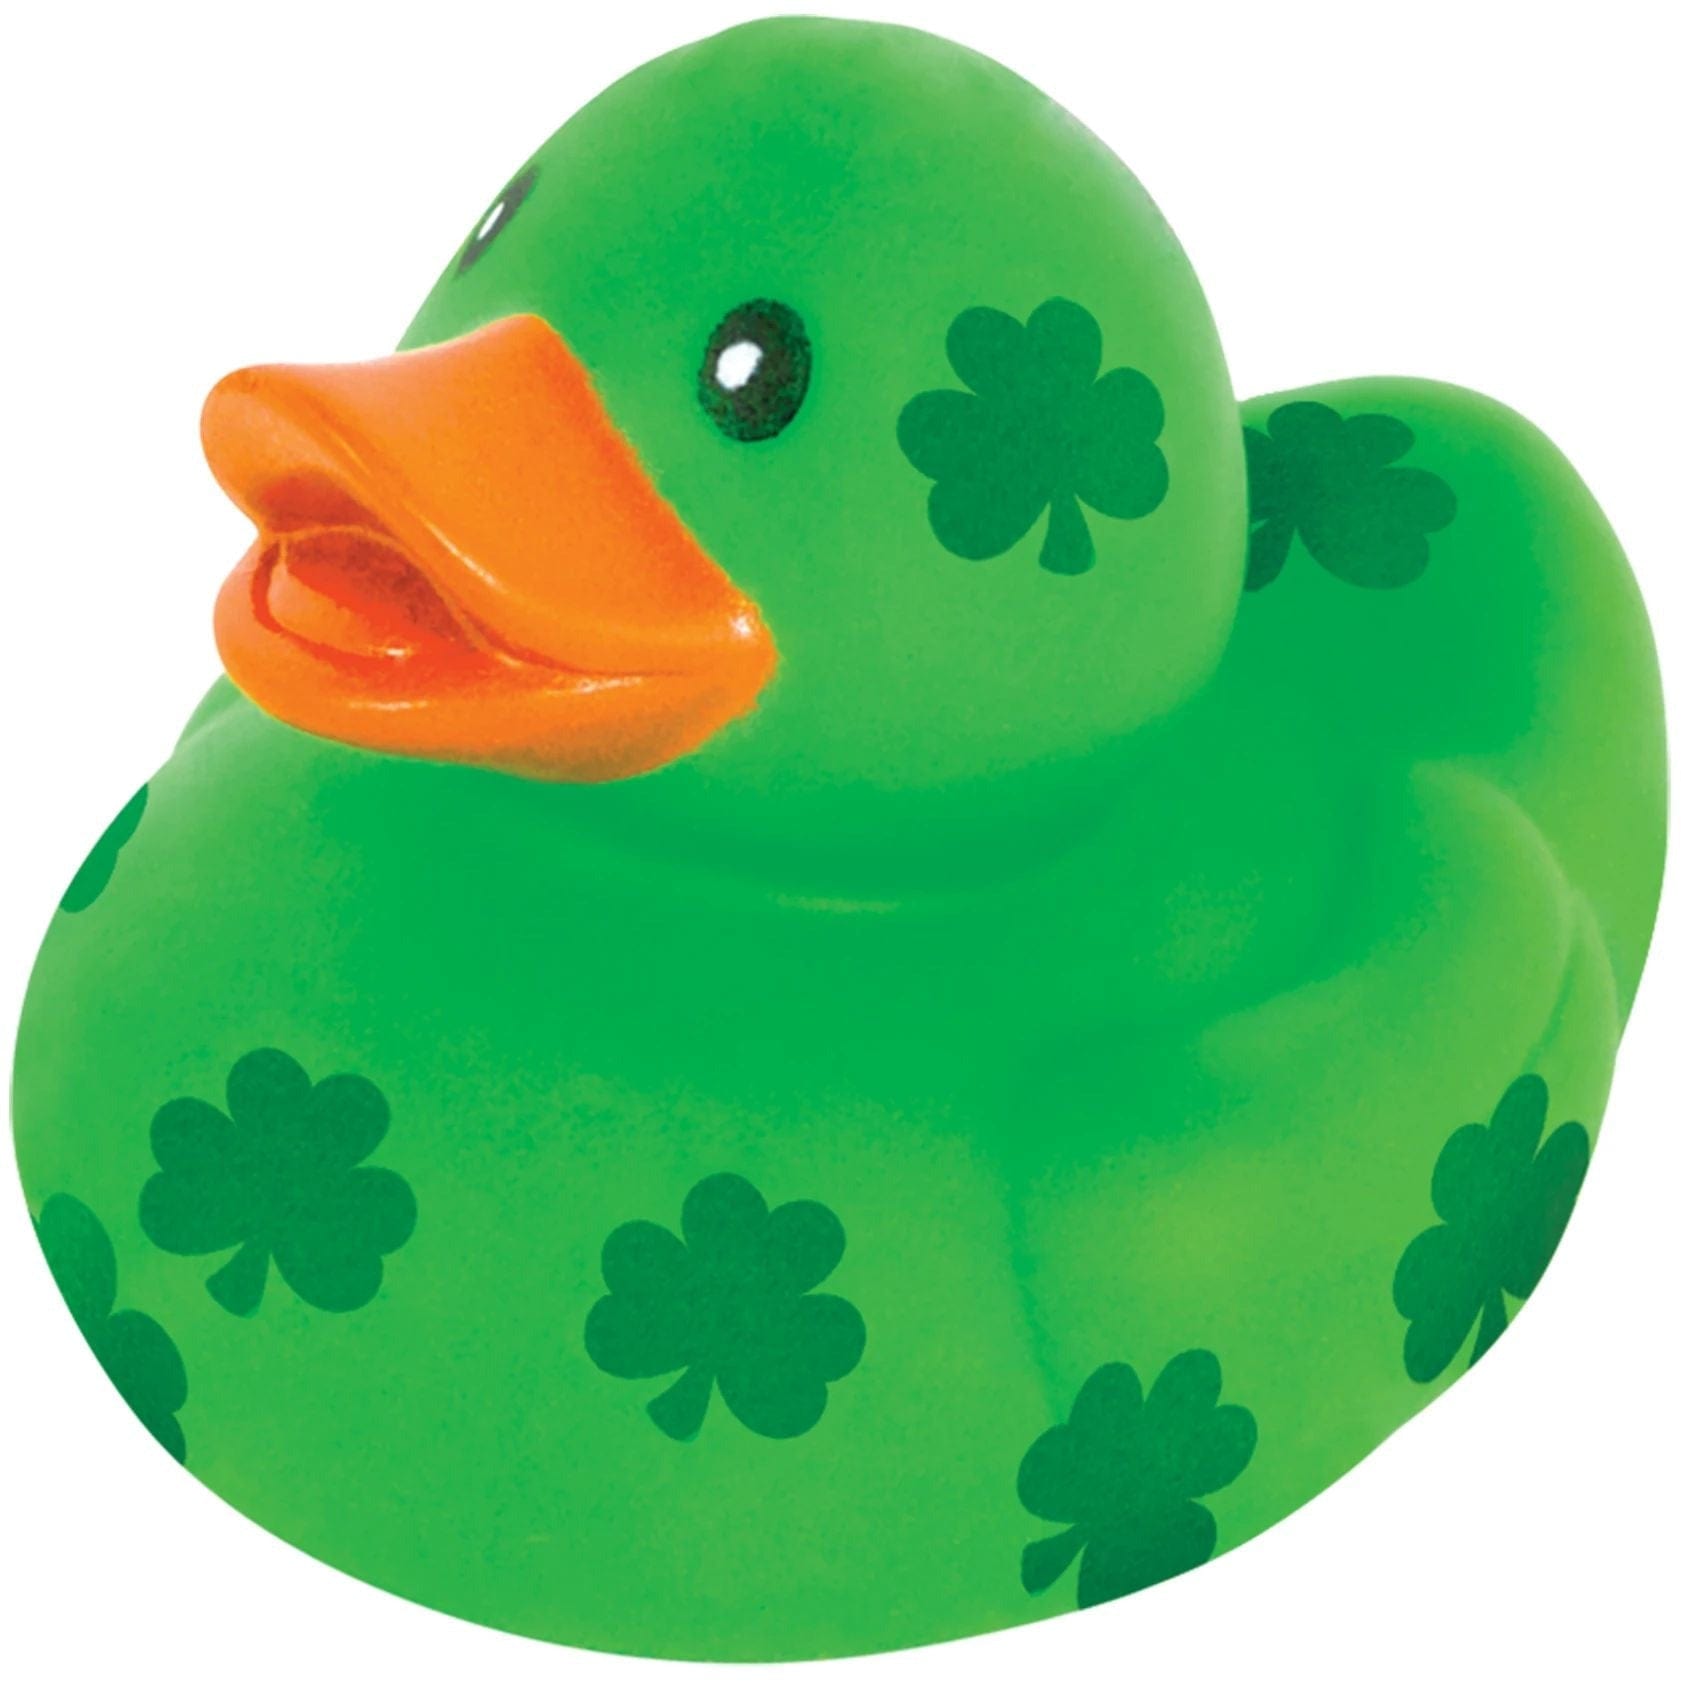 Amscan HOLIDAY: ST. PAT'S St. Patrick's Day Rubber Duck